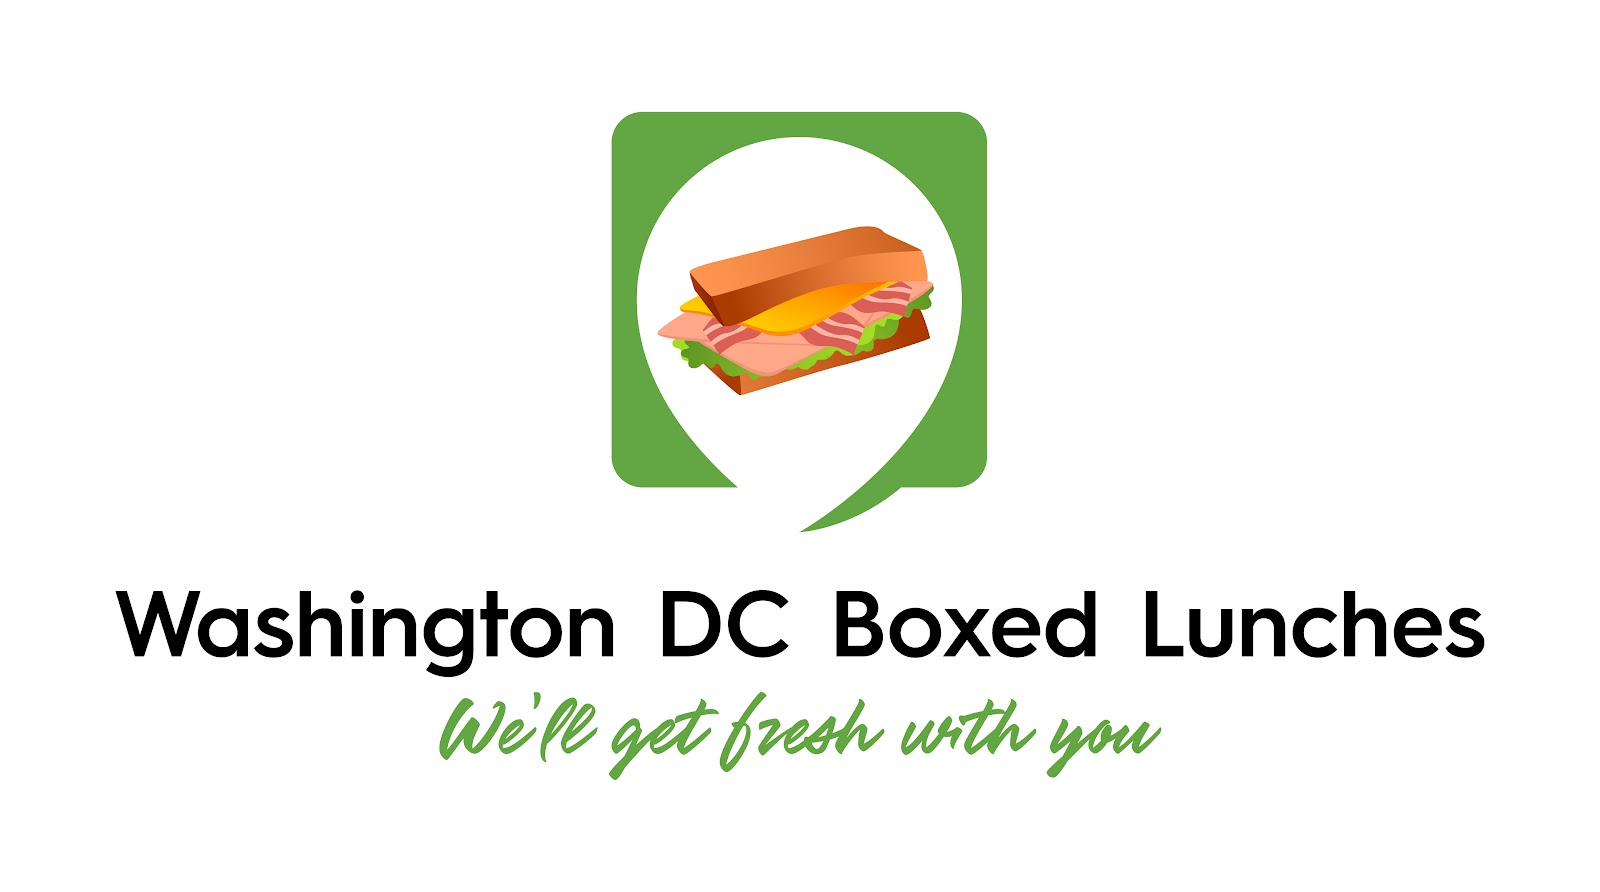 Individual Lunch Box Catering - Washington DC Boxed Lunches